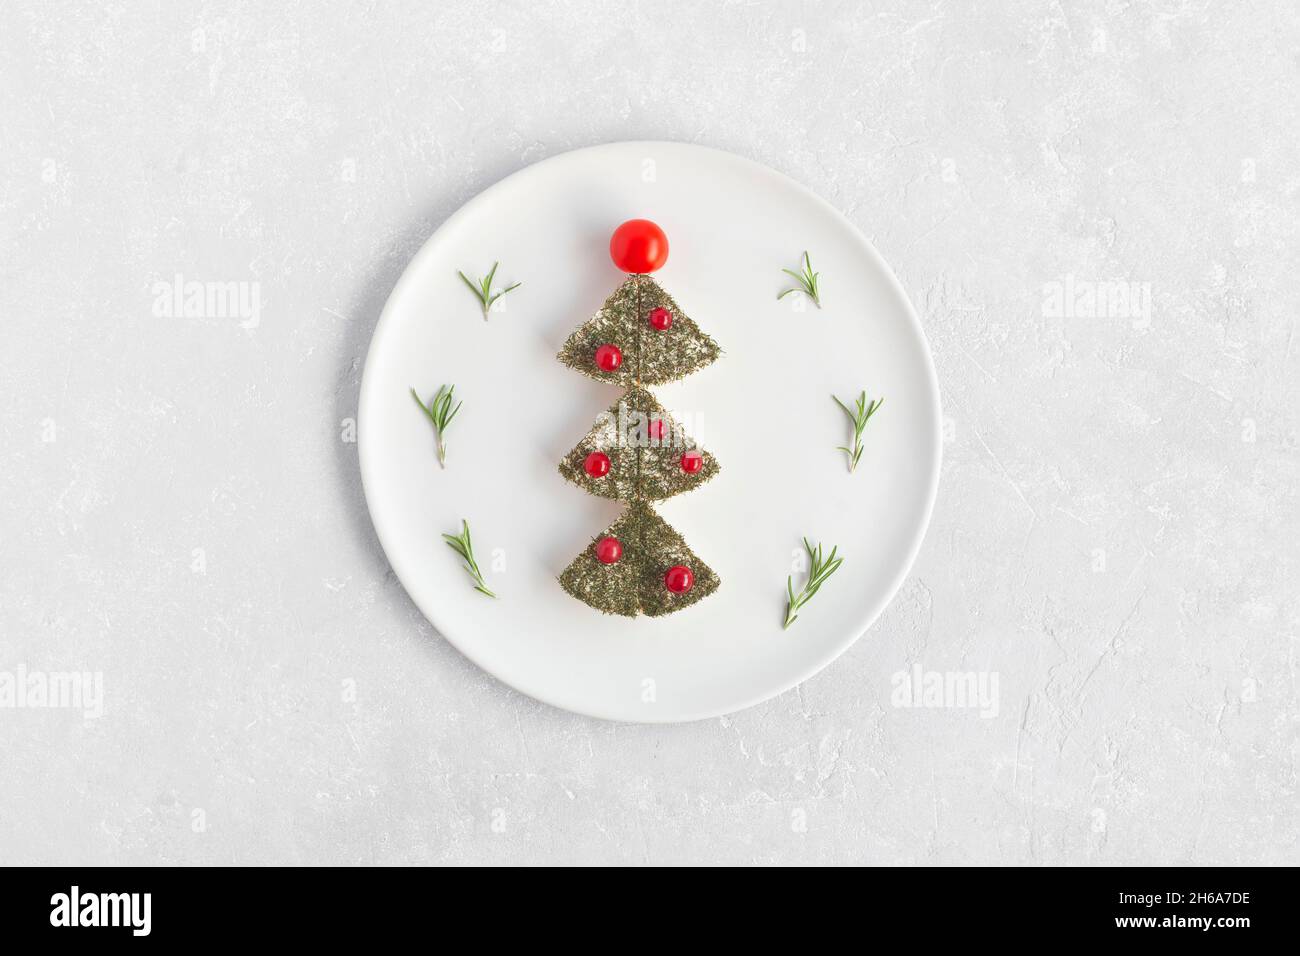 new year tree made of cheese and decorated with red currant and cherry tomatoes, decoration for new year table, white plate, top view Stock Photo